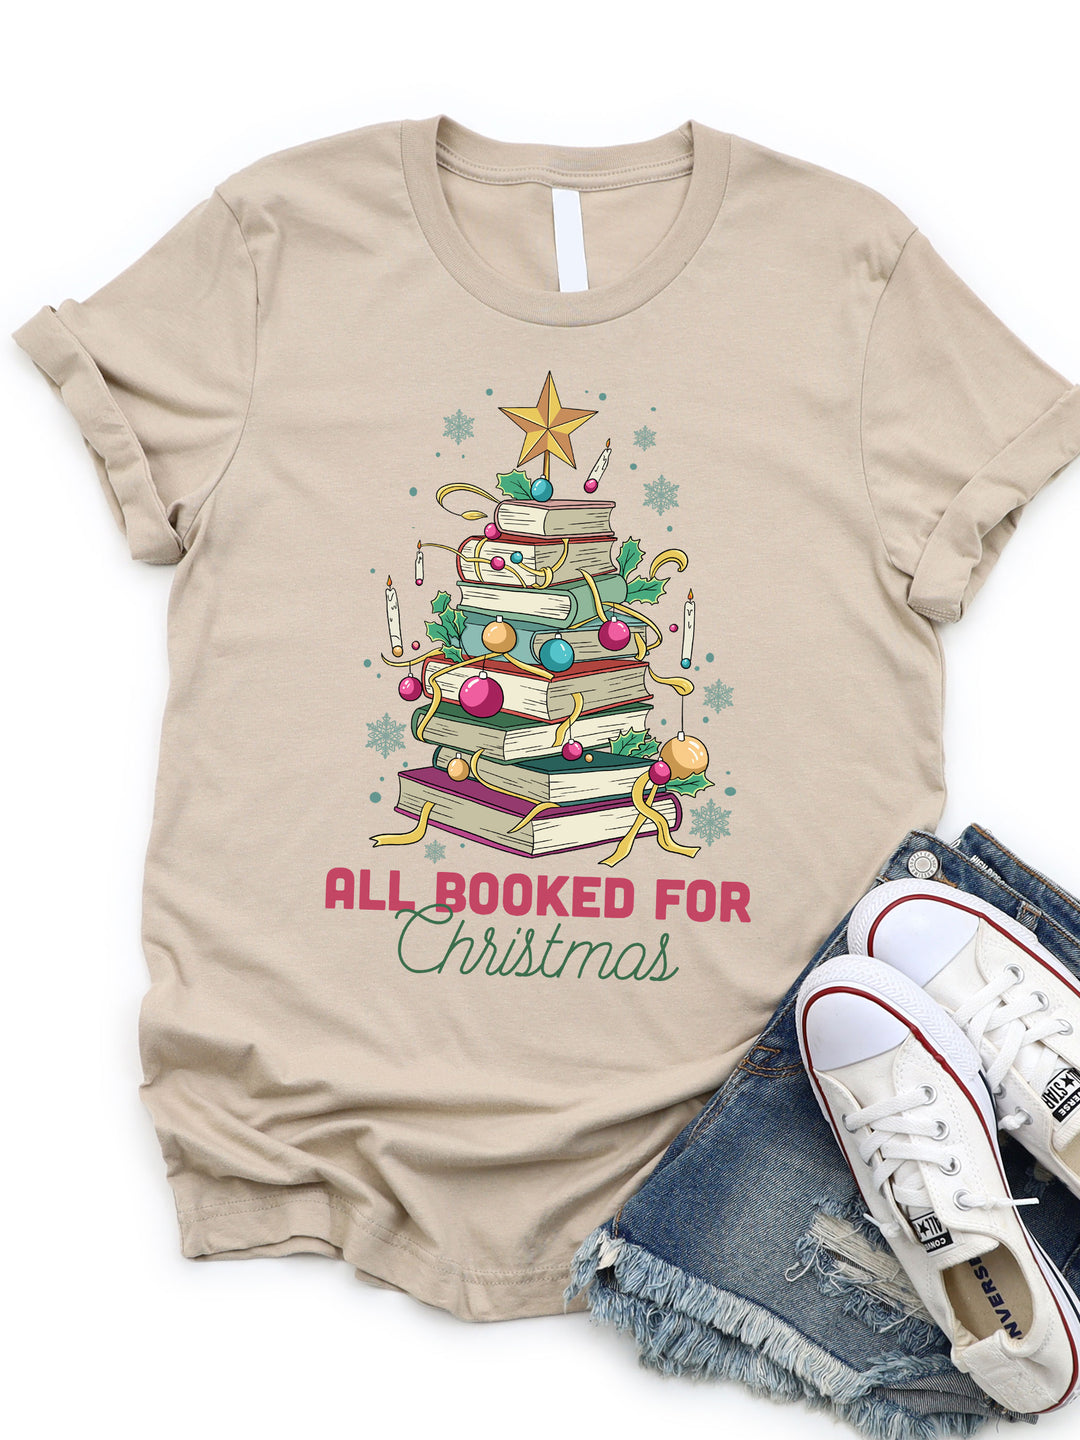 All booked for Christmas Graphic Tee